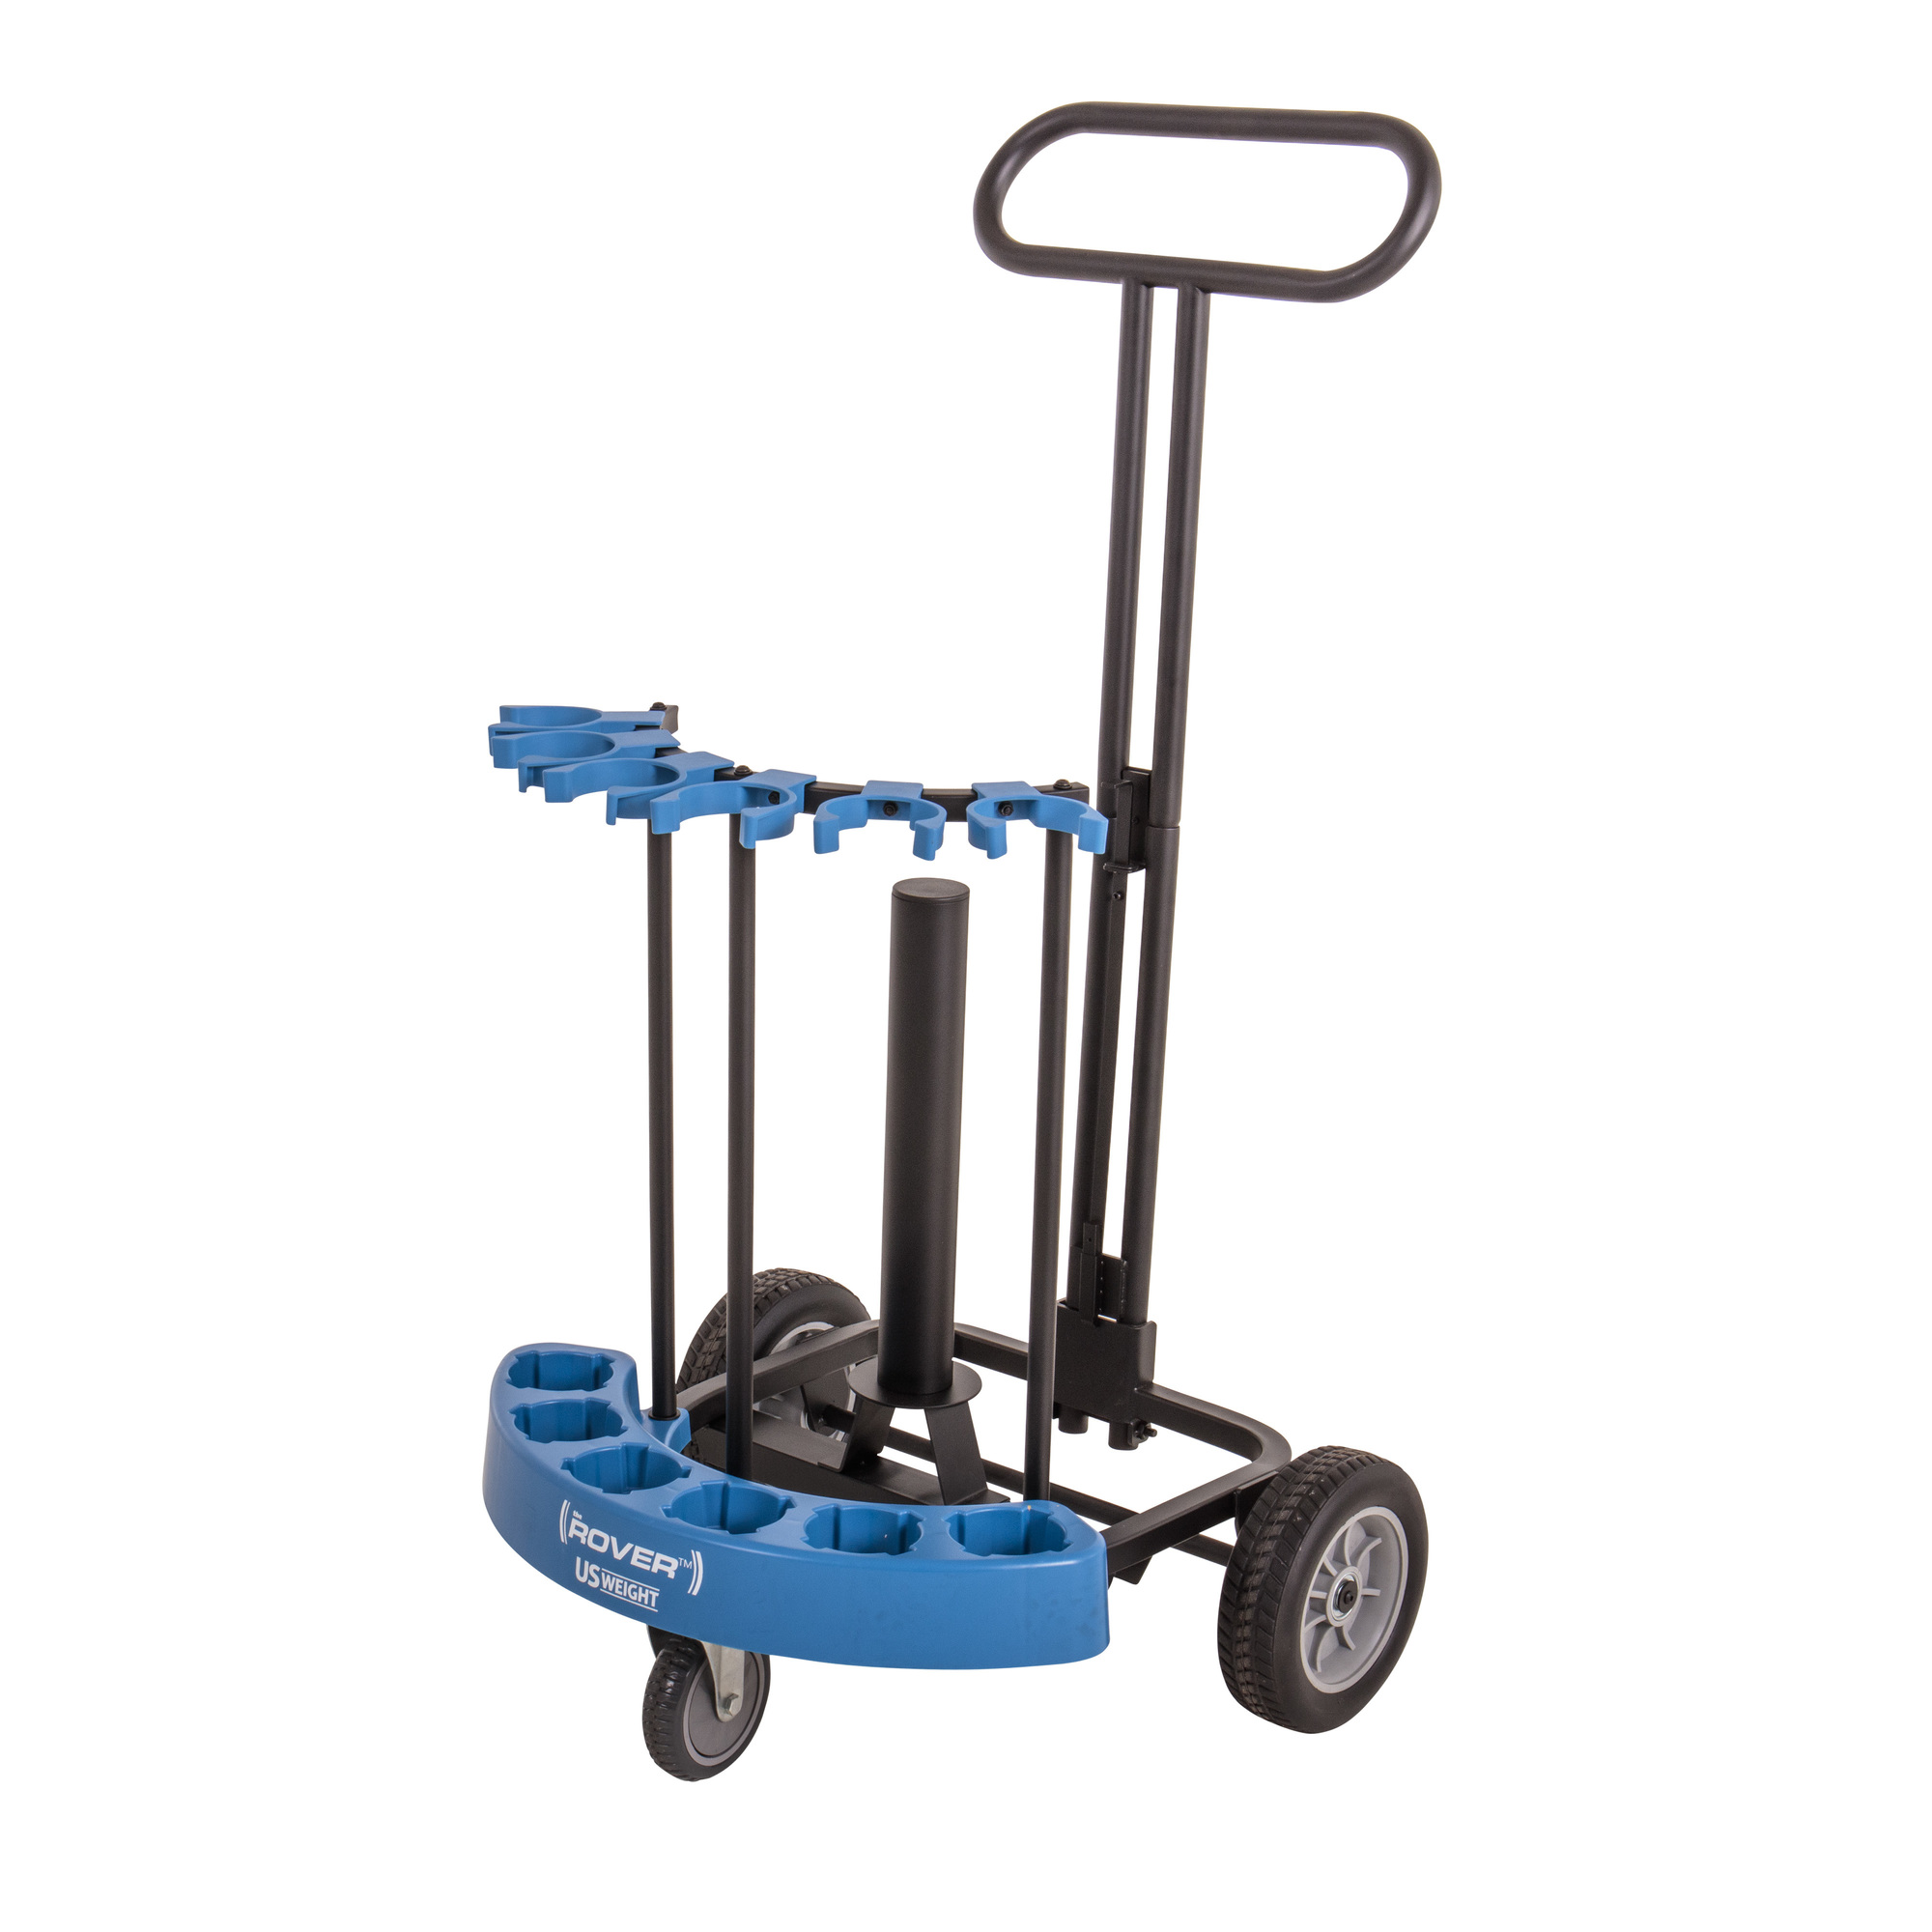 US Weight, Rover Stanchion Cart - Holds any 6 USW Stanchions, Model U2520